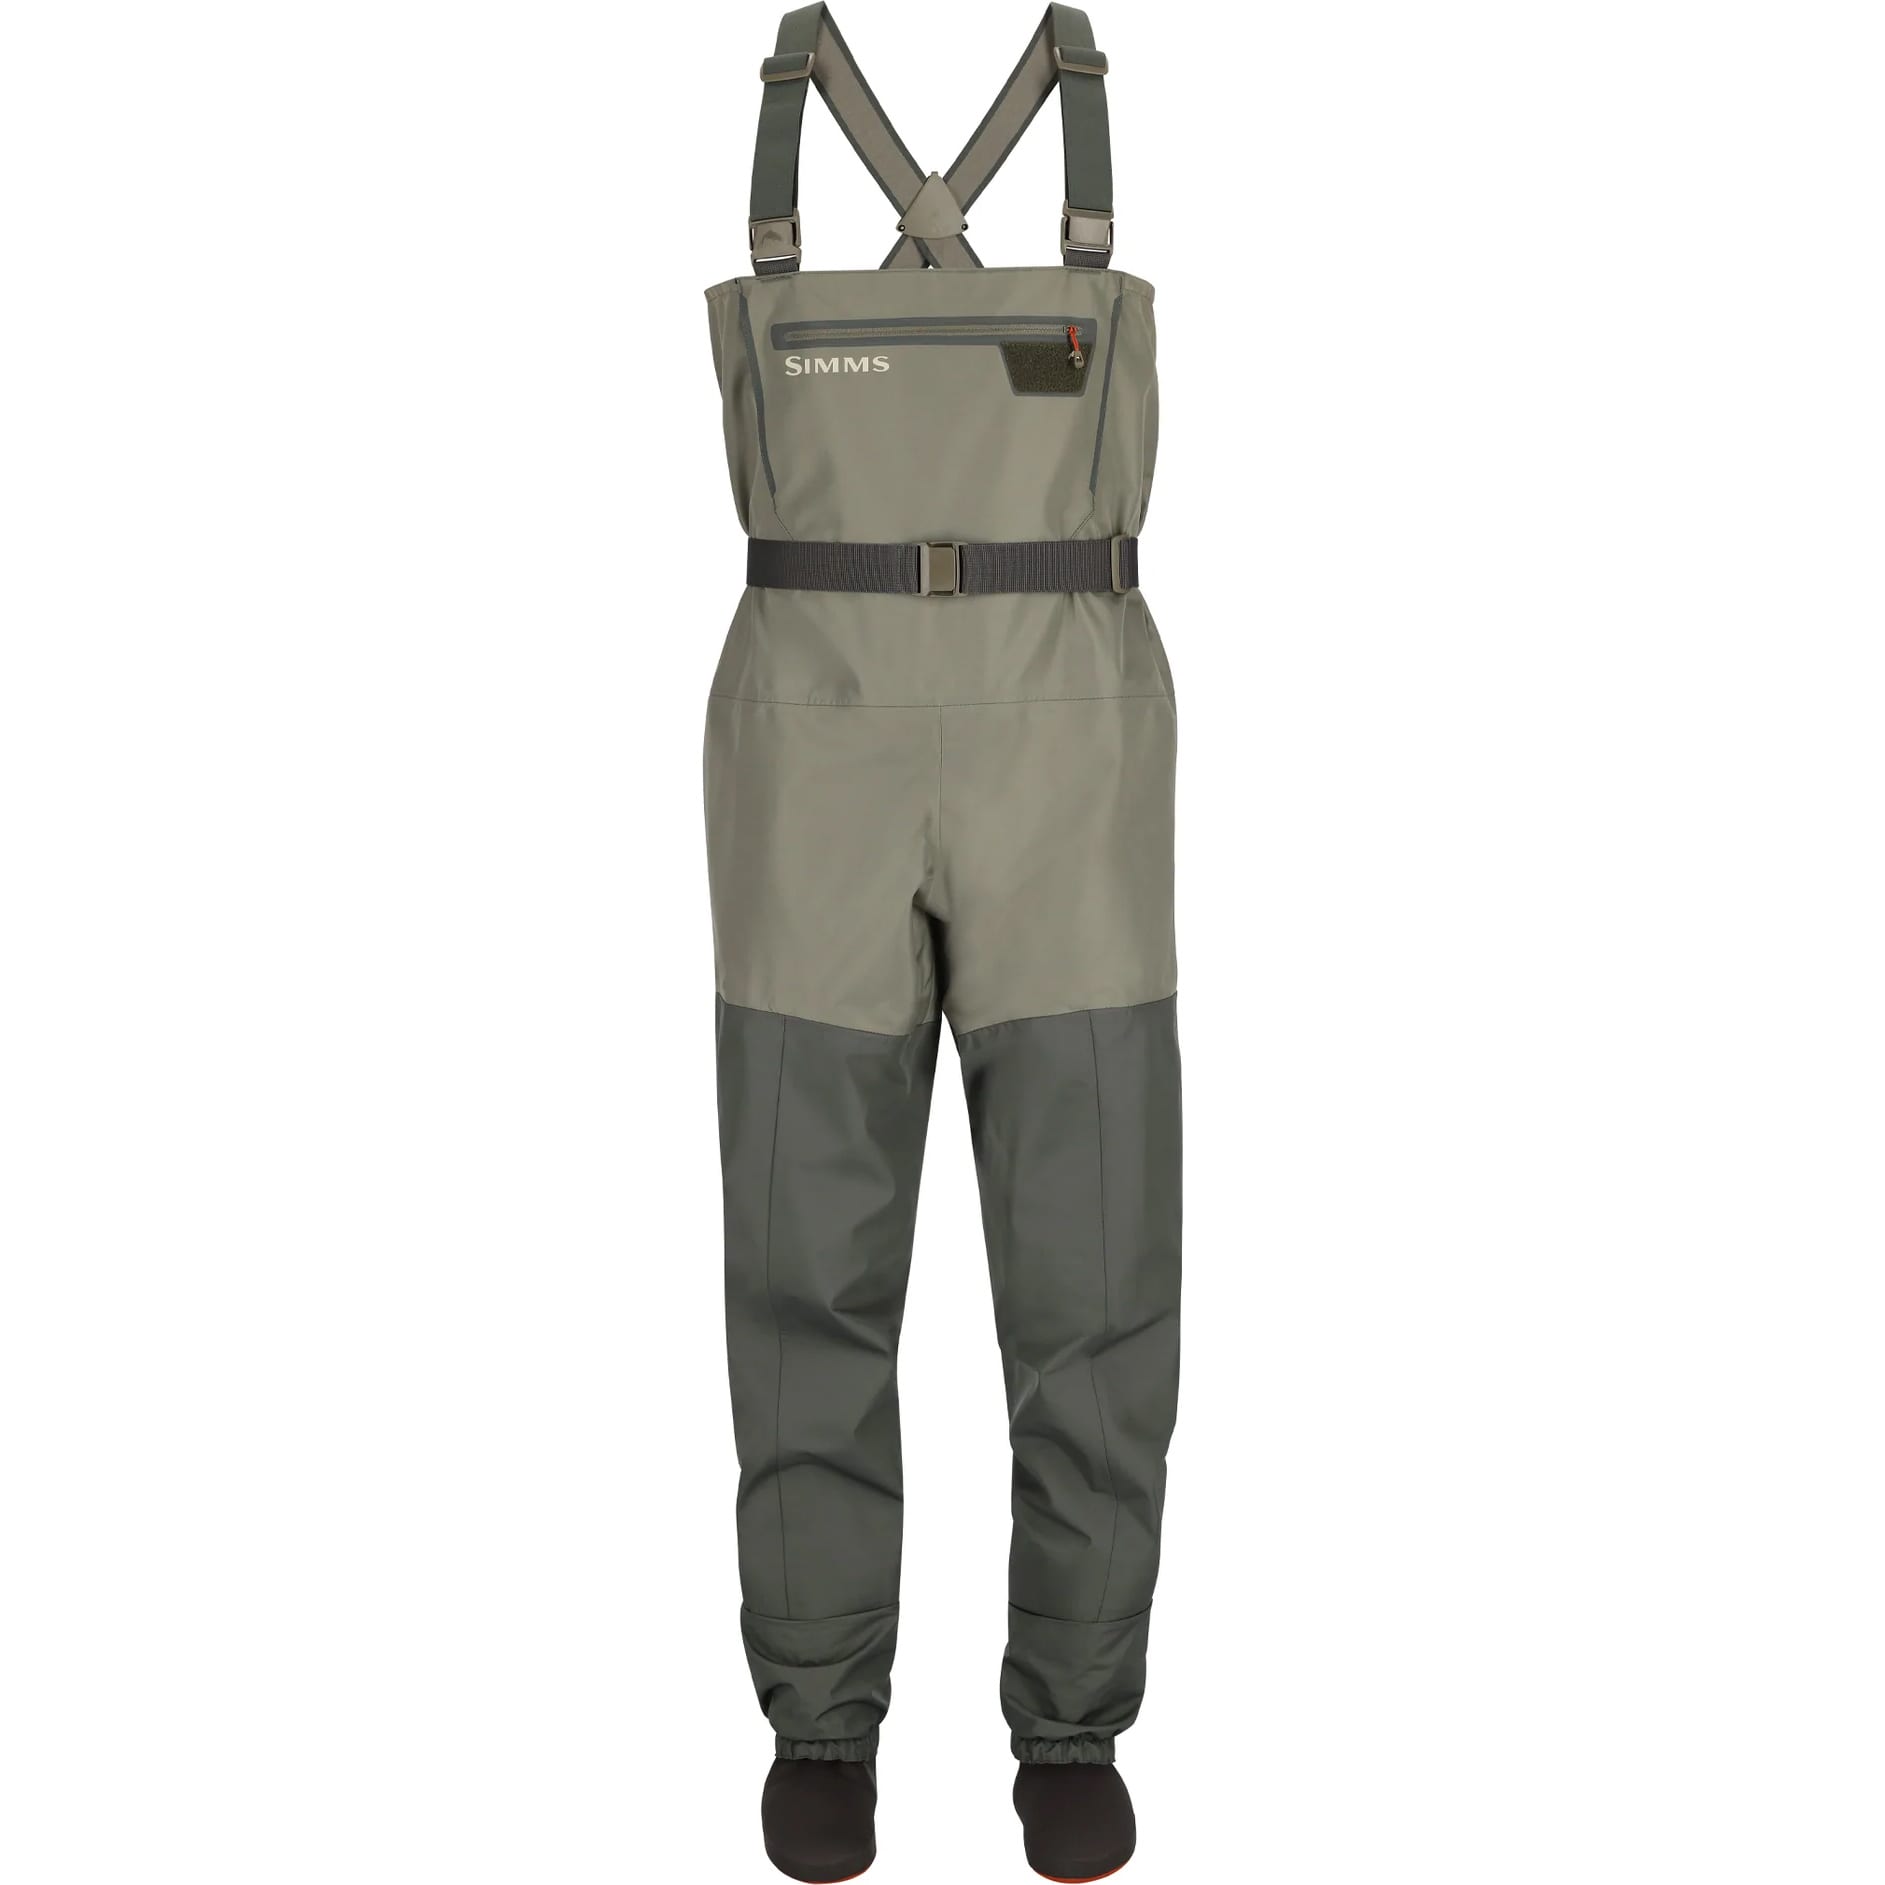 Men's IMMERSE Breathable Ripstop Wader - Stocking Foot